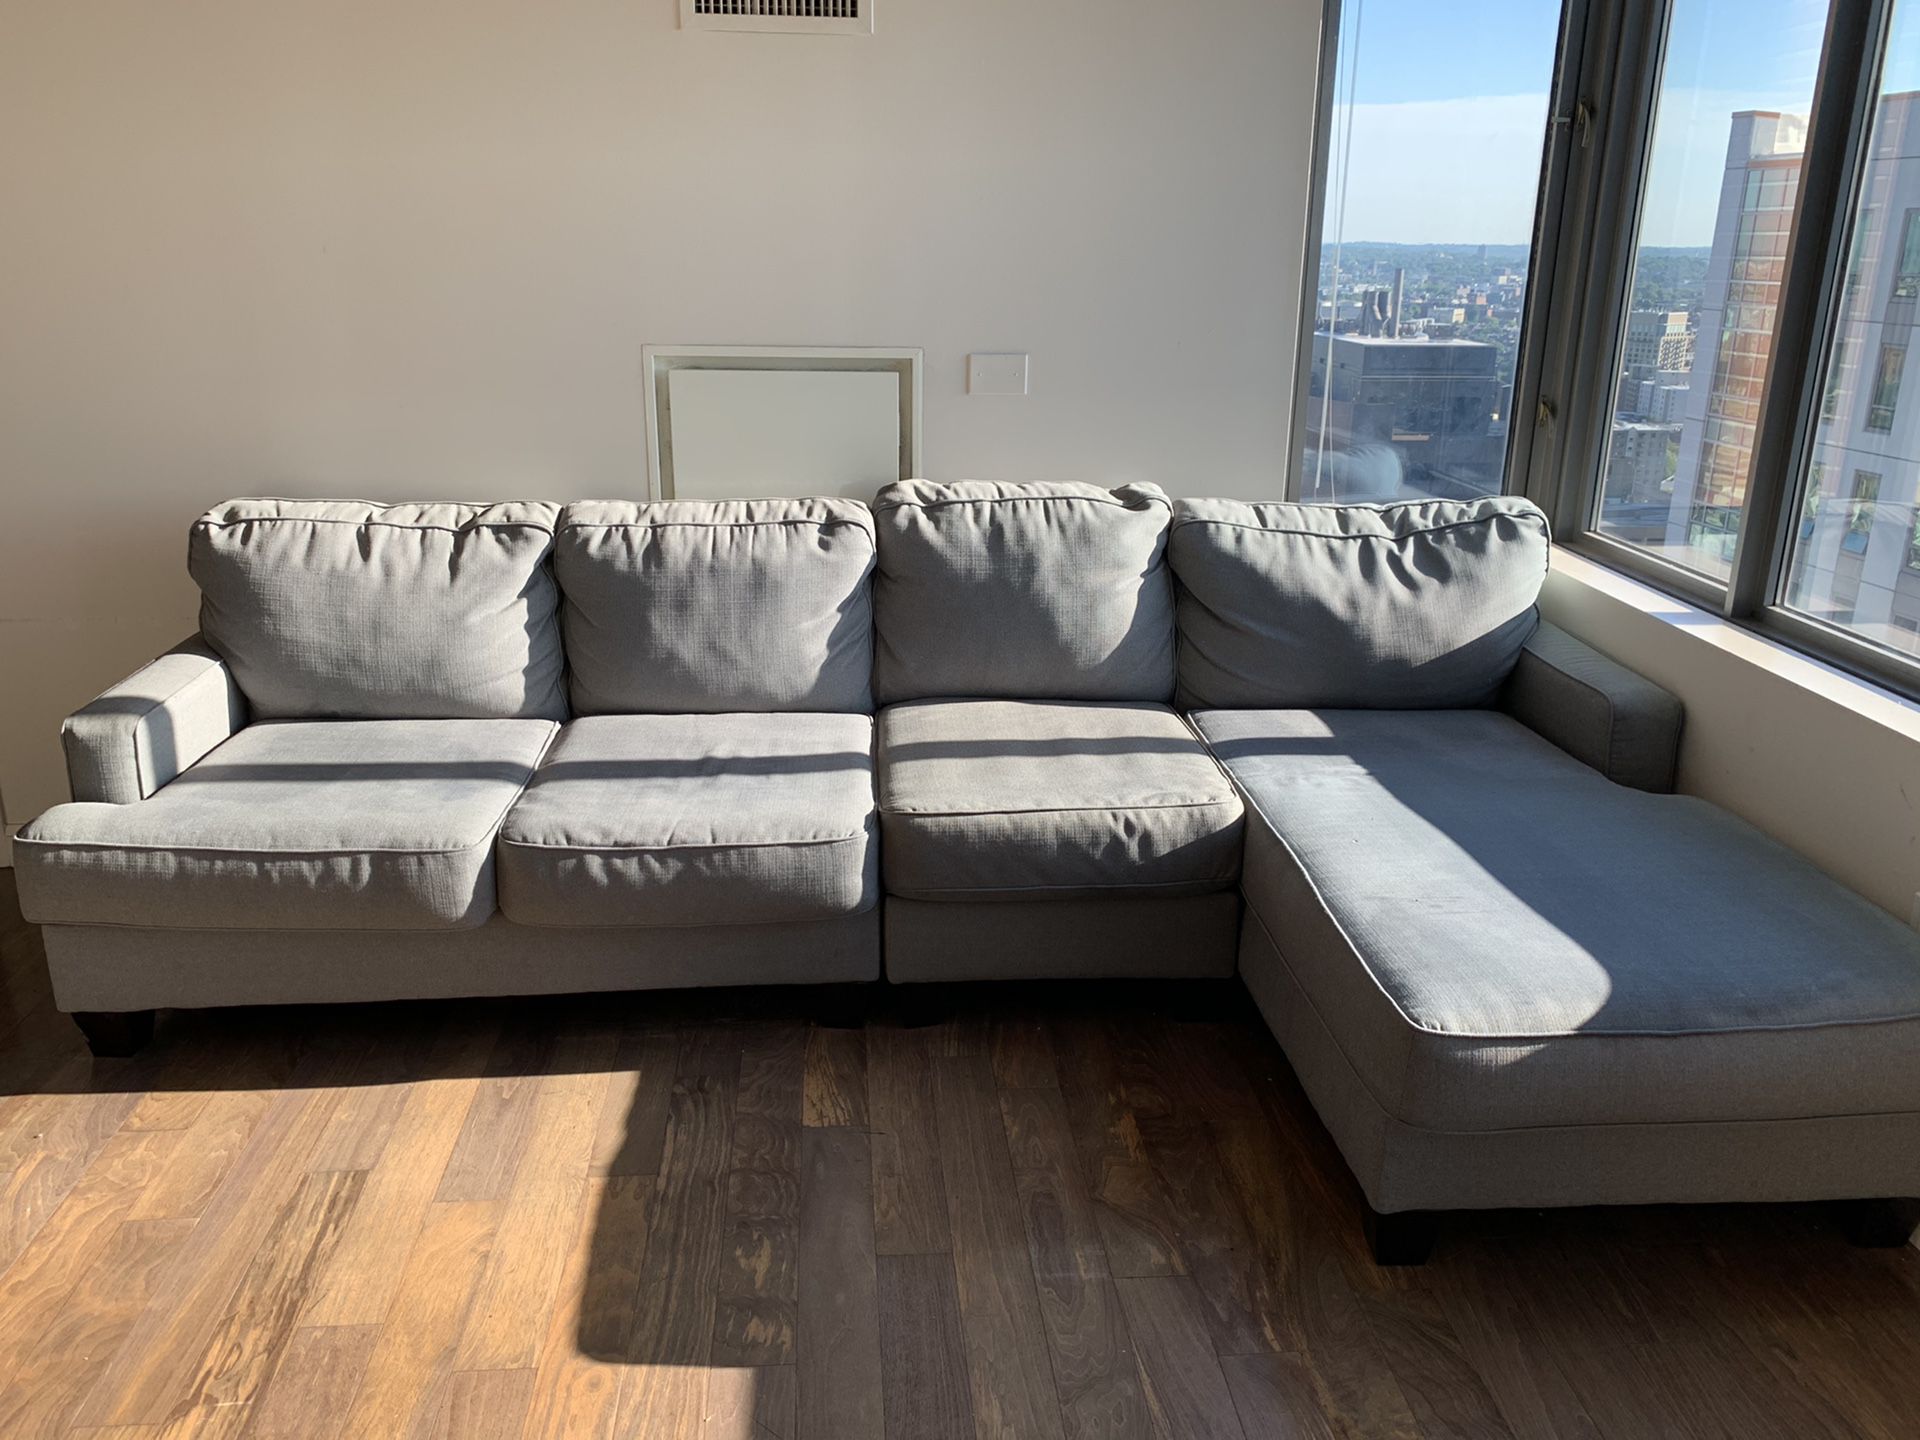 Grey Comfy Couch $300